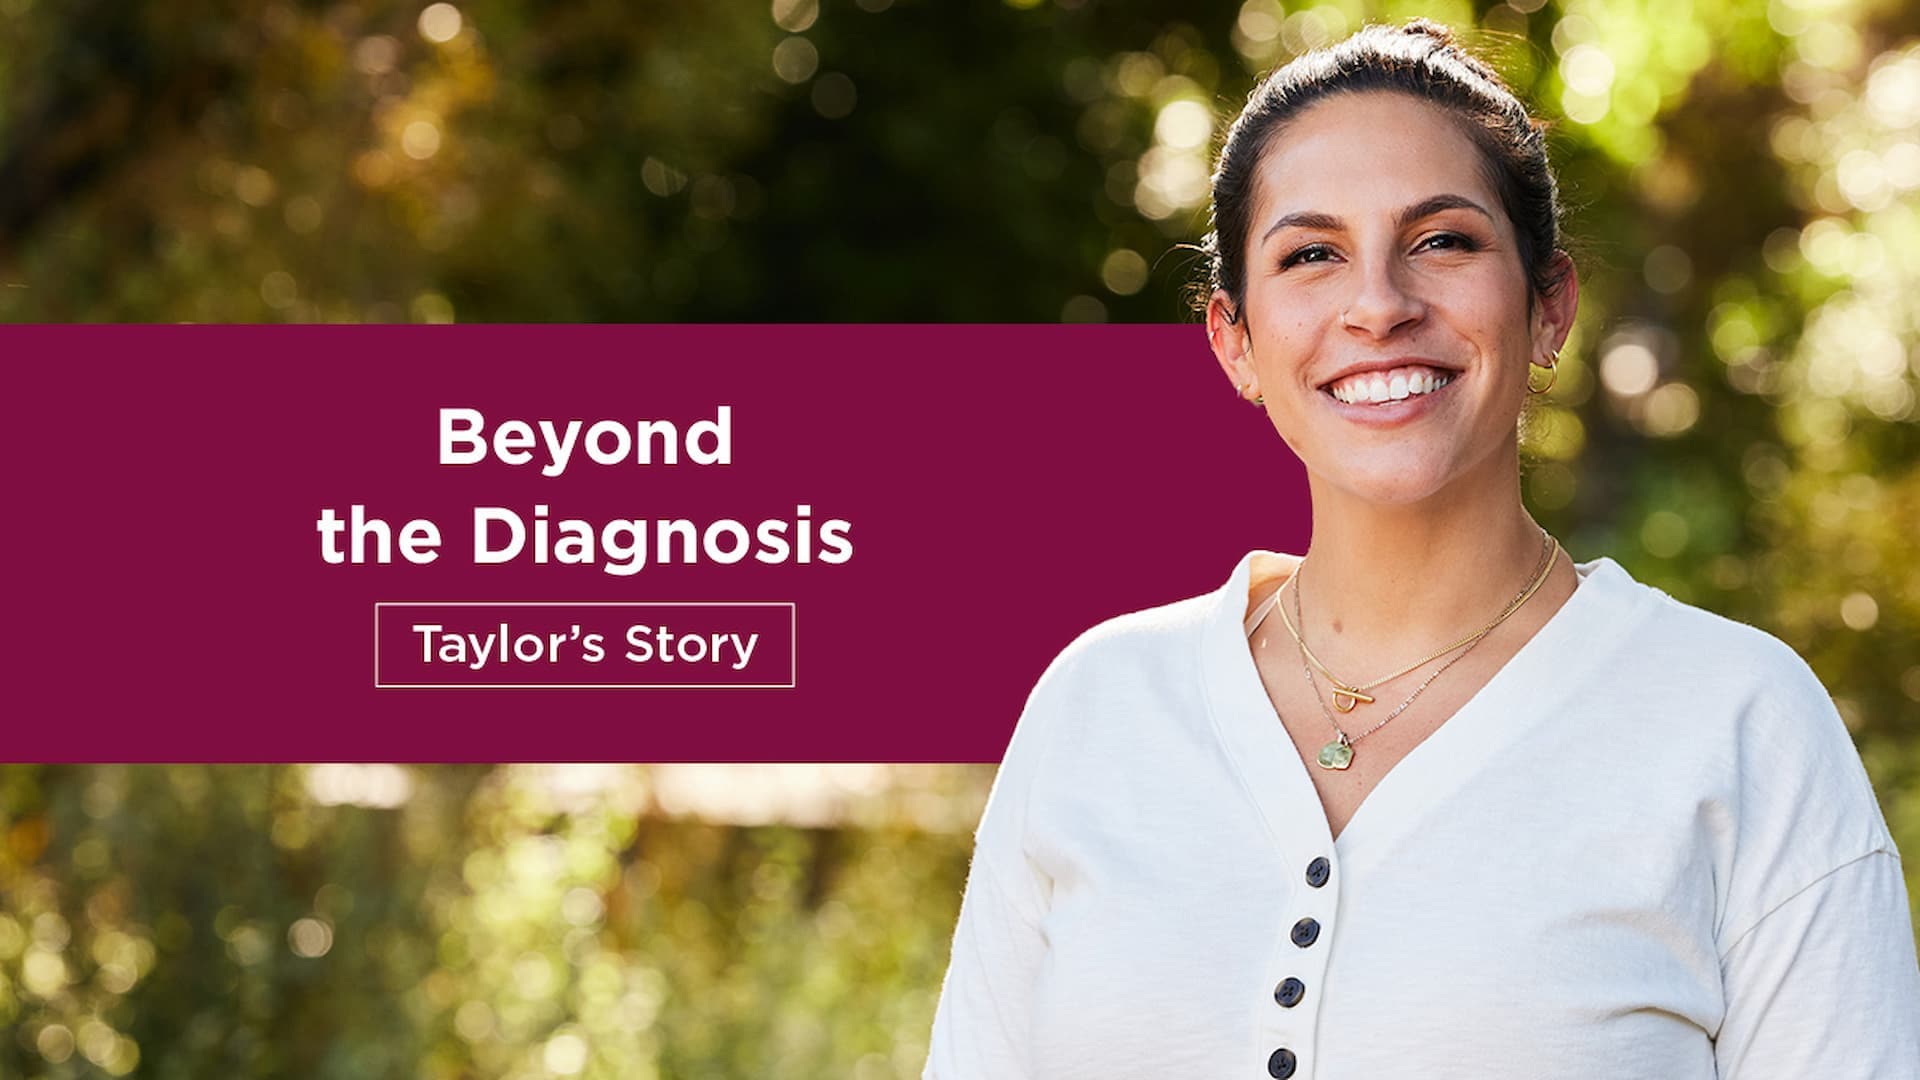 Beyond the Diagnosis: Taylor’s Story. Photo of Taylor